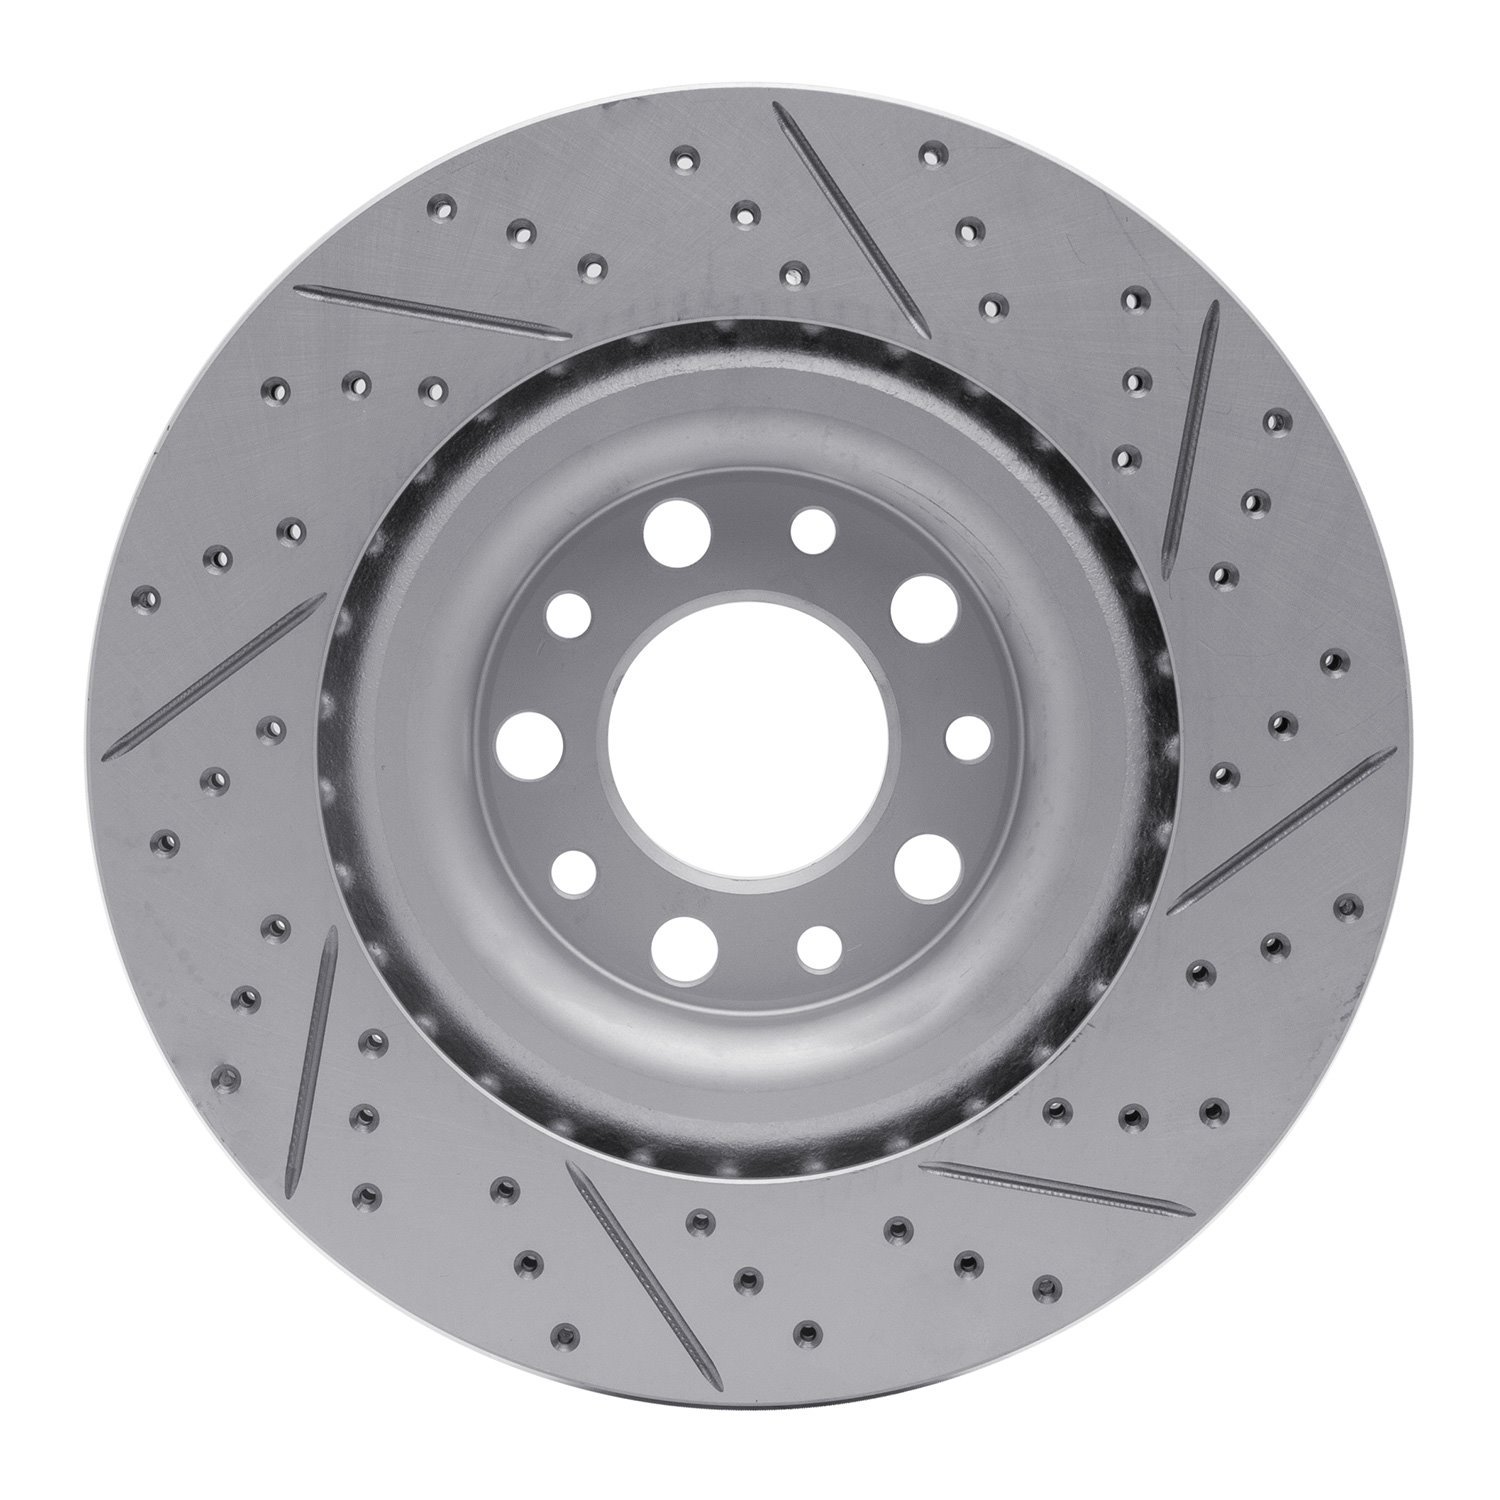 830-16013L Geoperformance Drilled/Slotted Brake Rotor, Fits Select Alfa Romeo, Position: Rear Left